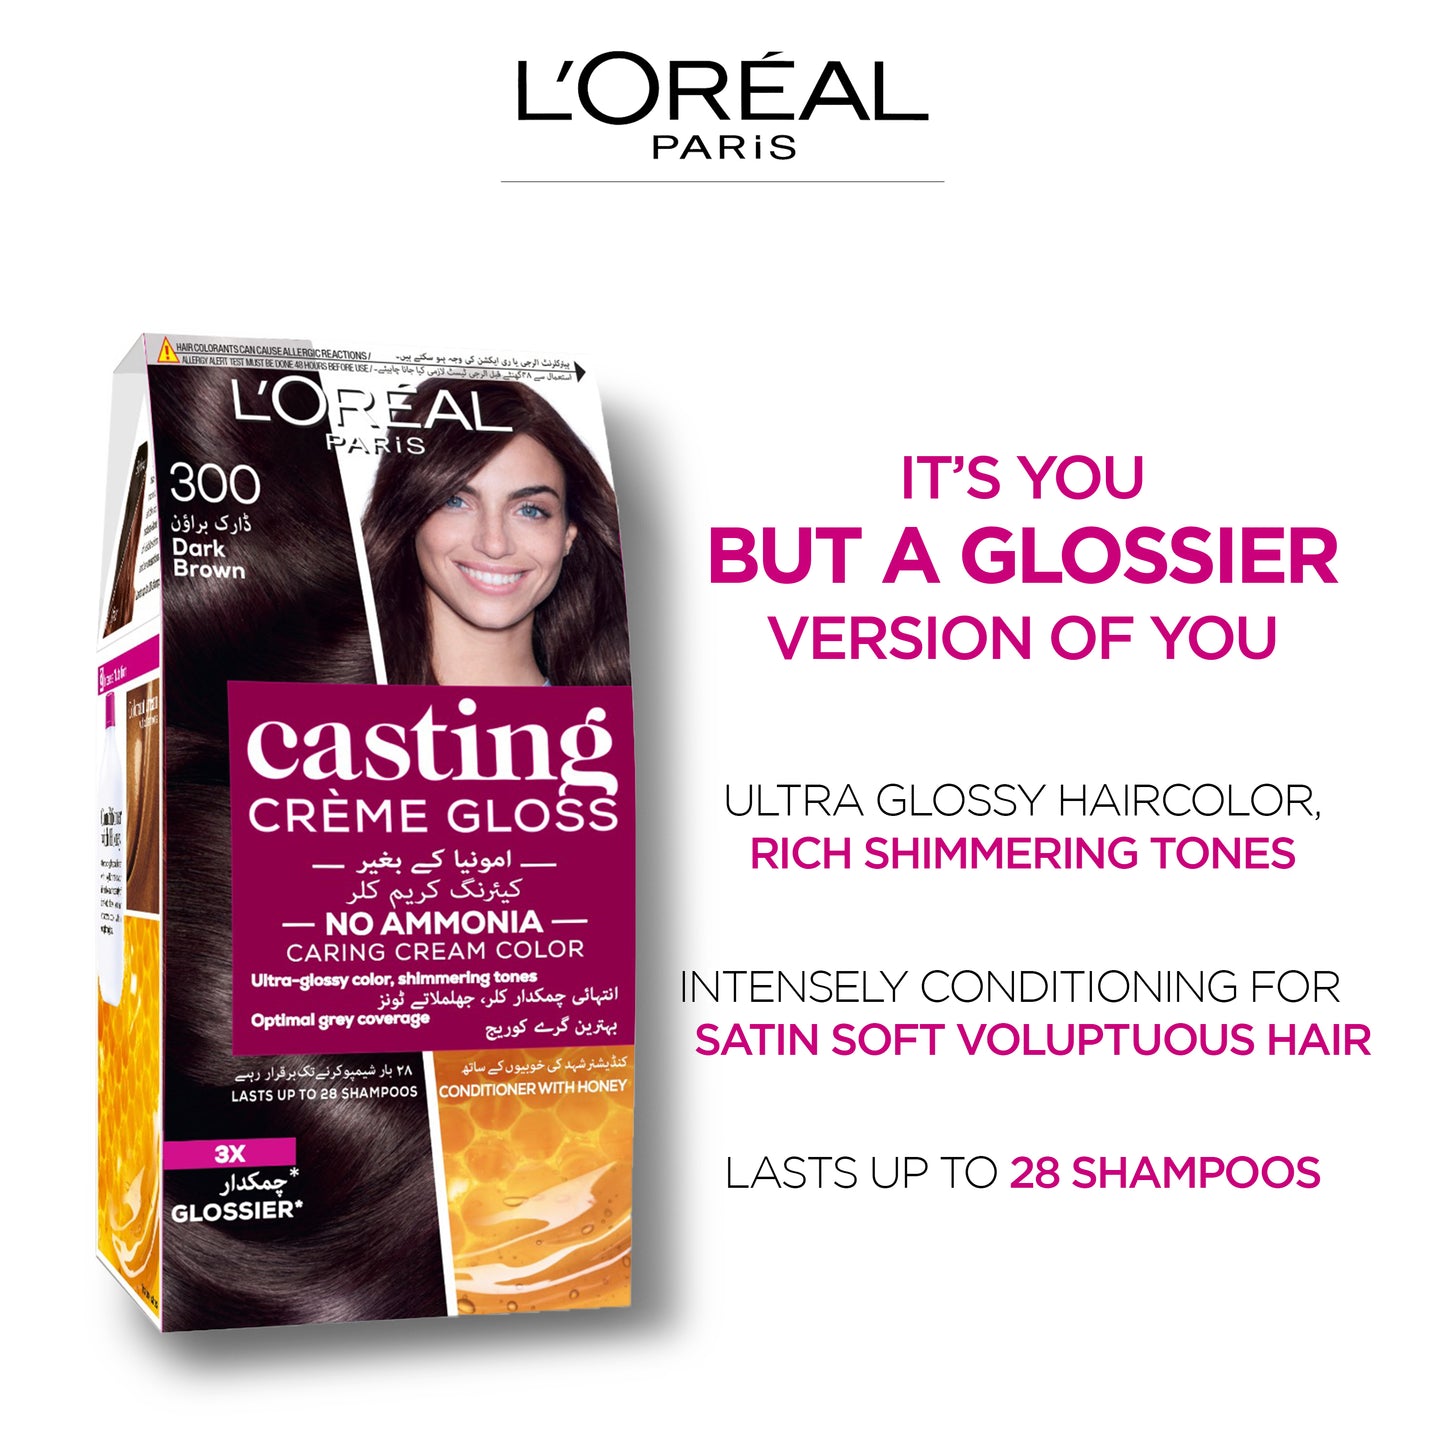 L'Oreal Casting Creme Gloss Hair Color 323 Darkest Warm Brown